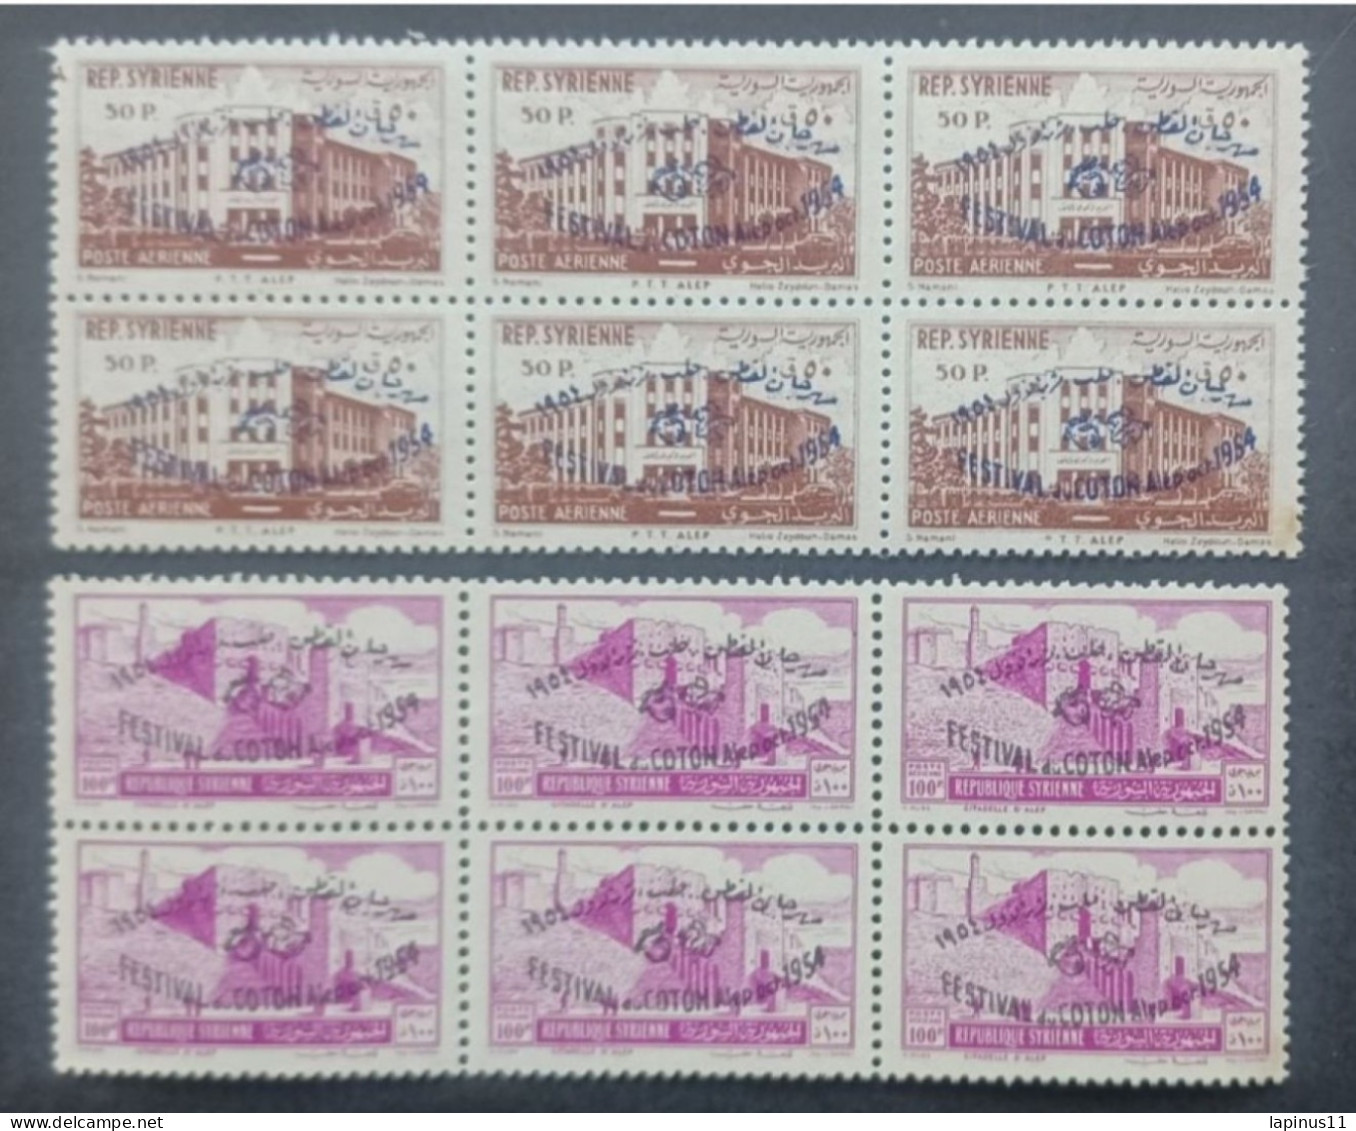 SYRIE سوريا SYRIA 1954 AIRMAIL COTTON FESTIVAL CAT YVERT N 54/55 - Syrië